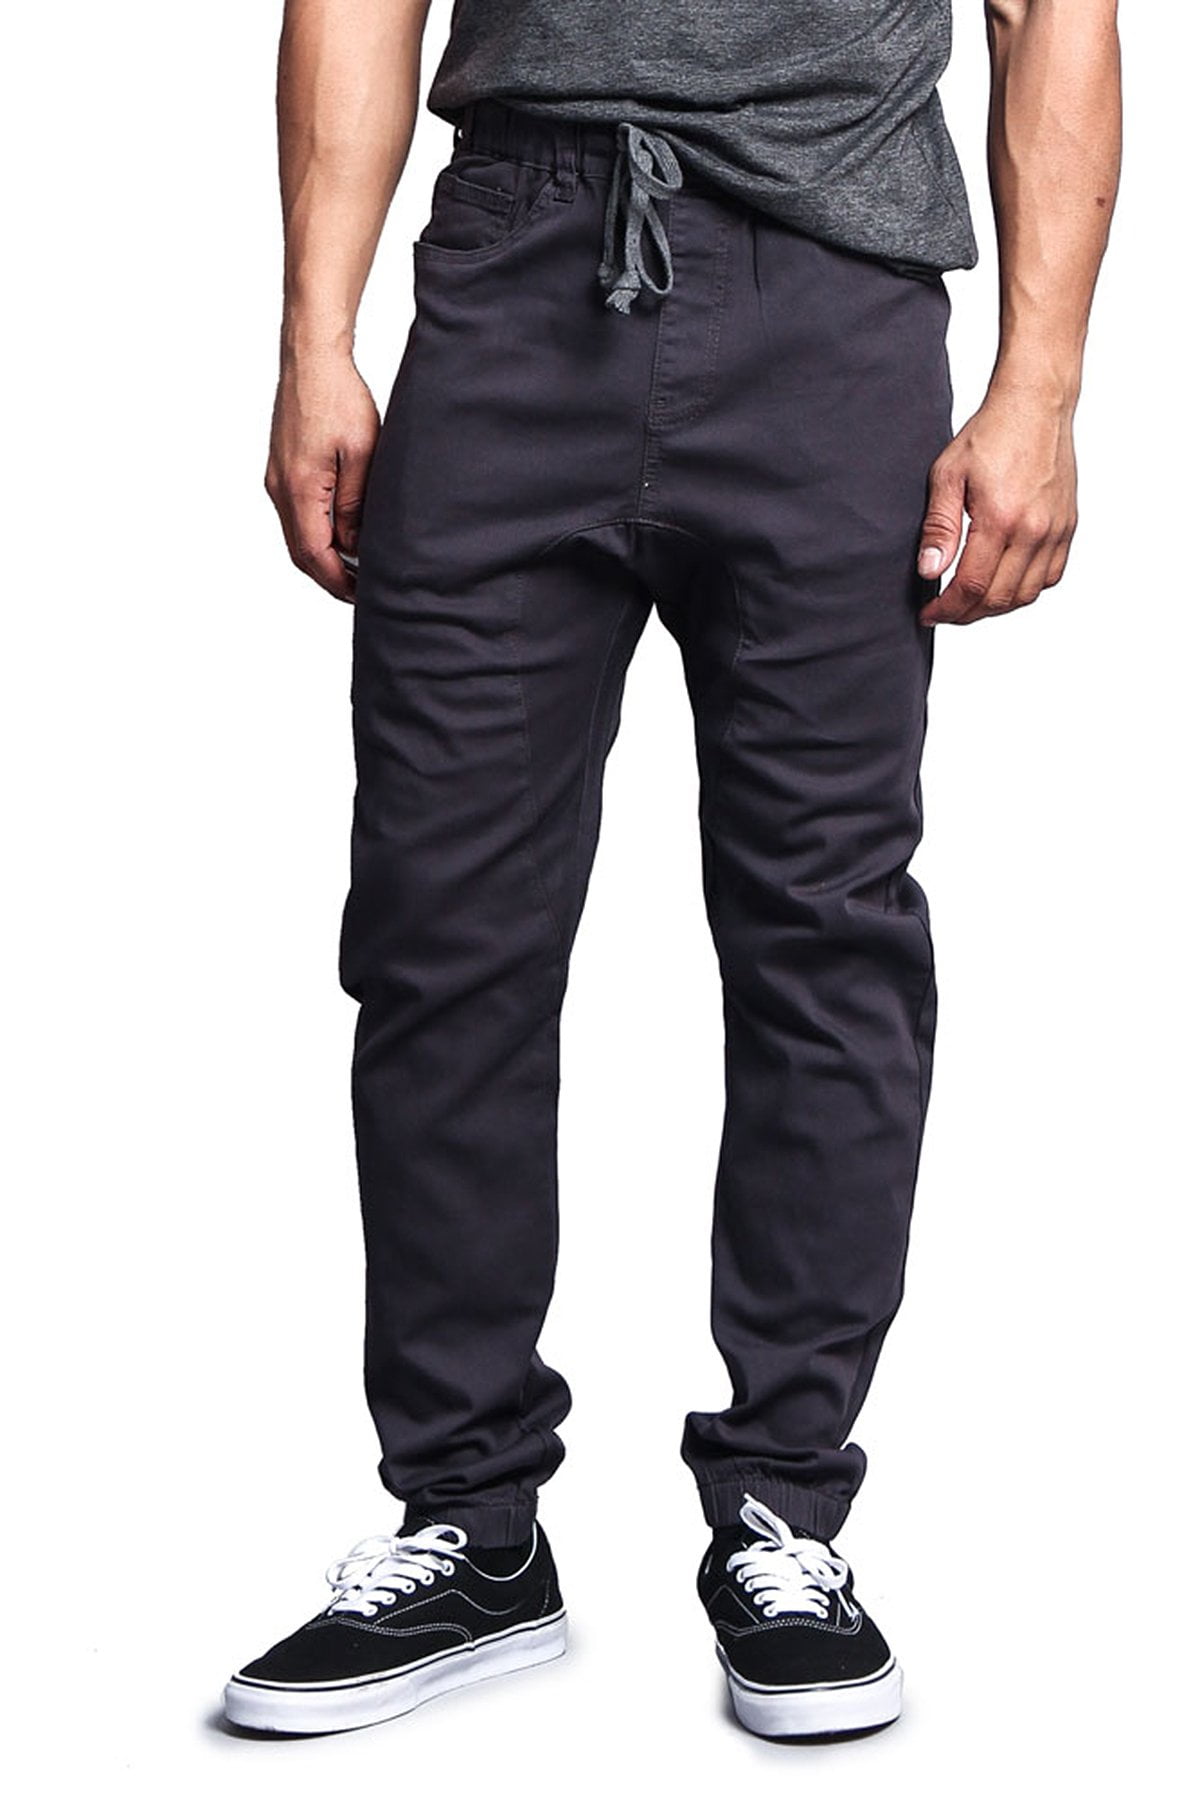 Victorious Mens Twill Jogger Pants